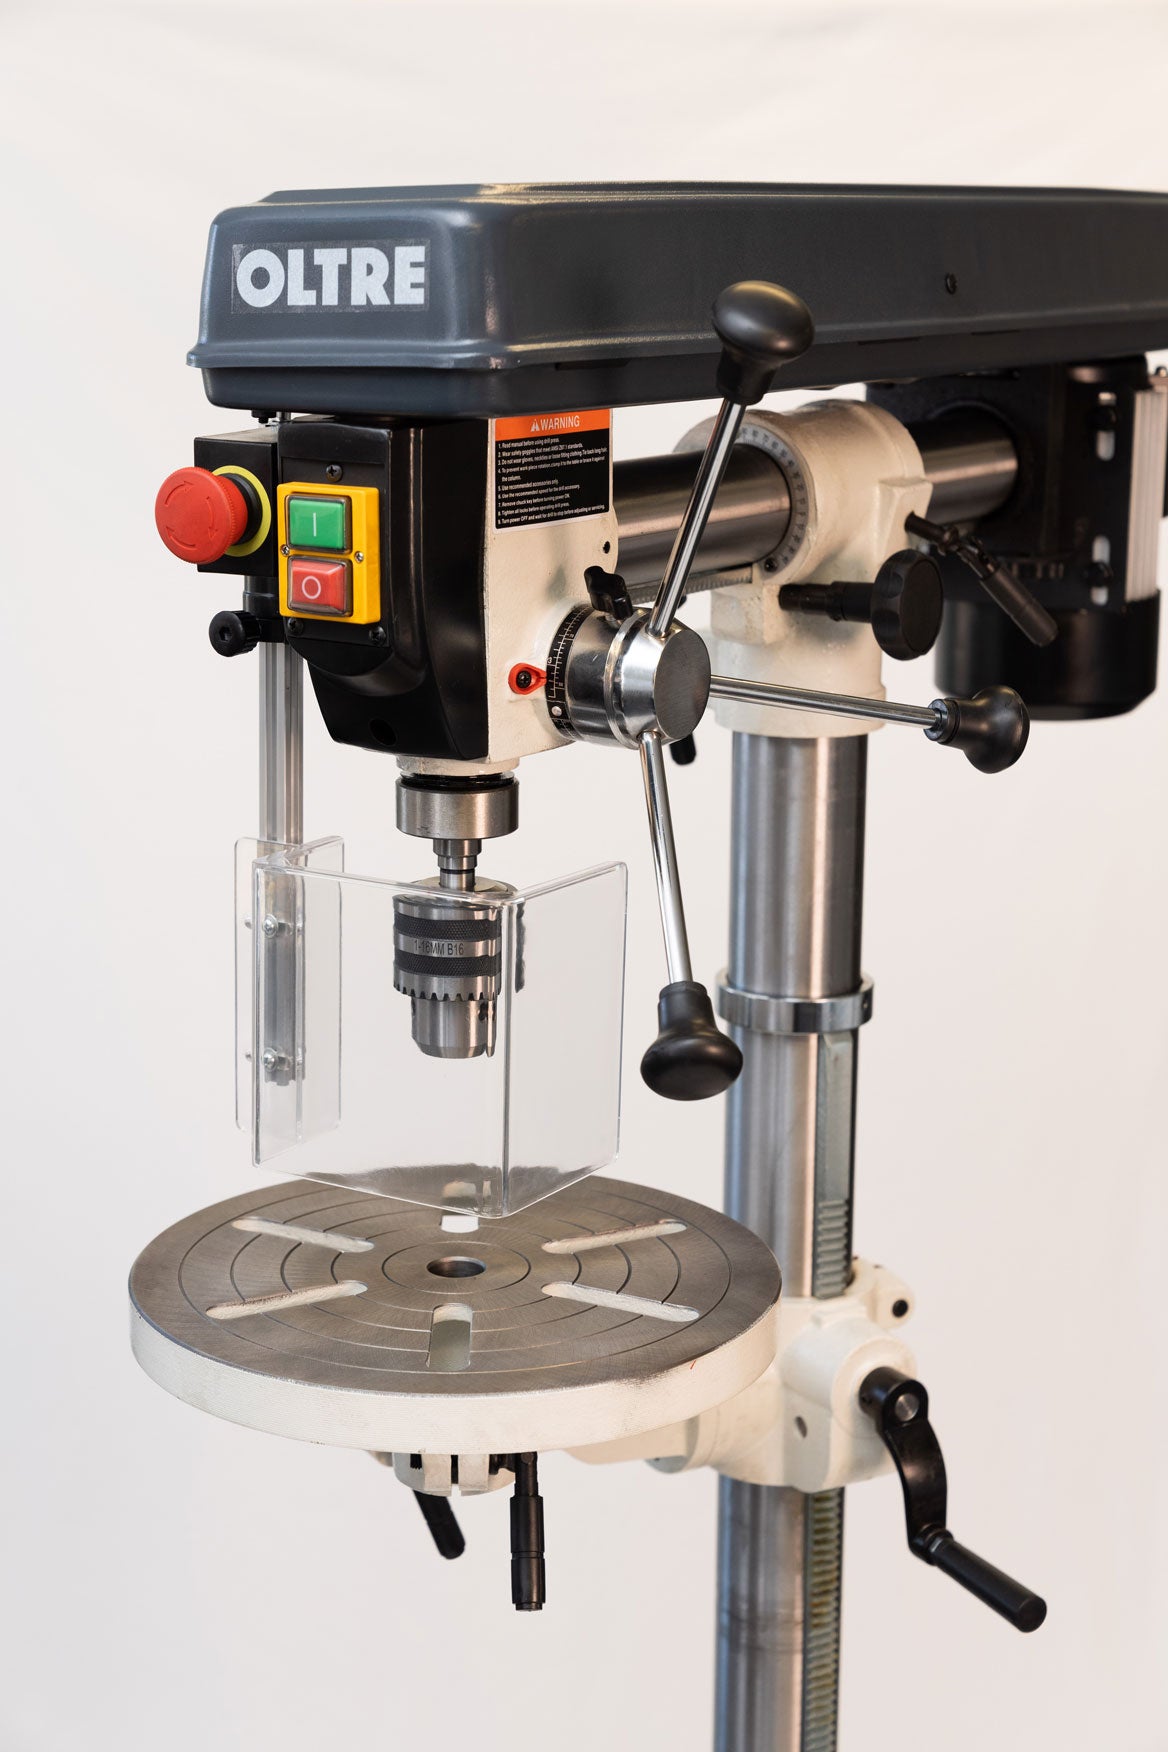 860mm (34") Radial Floor Mount Drill Press RDP86016F by Oltre